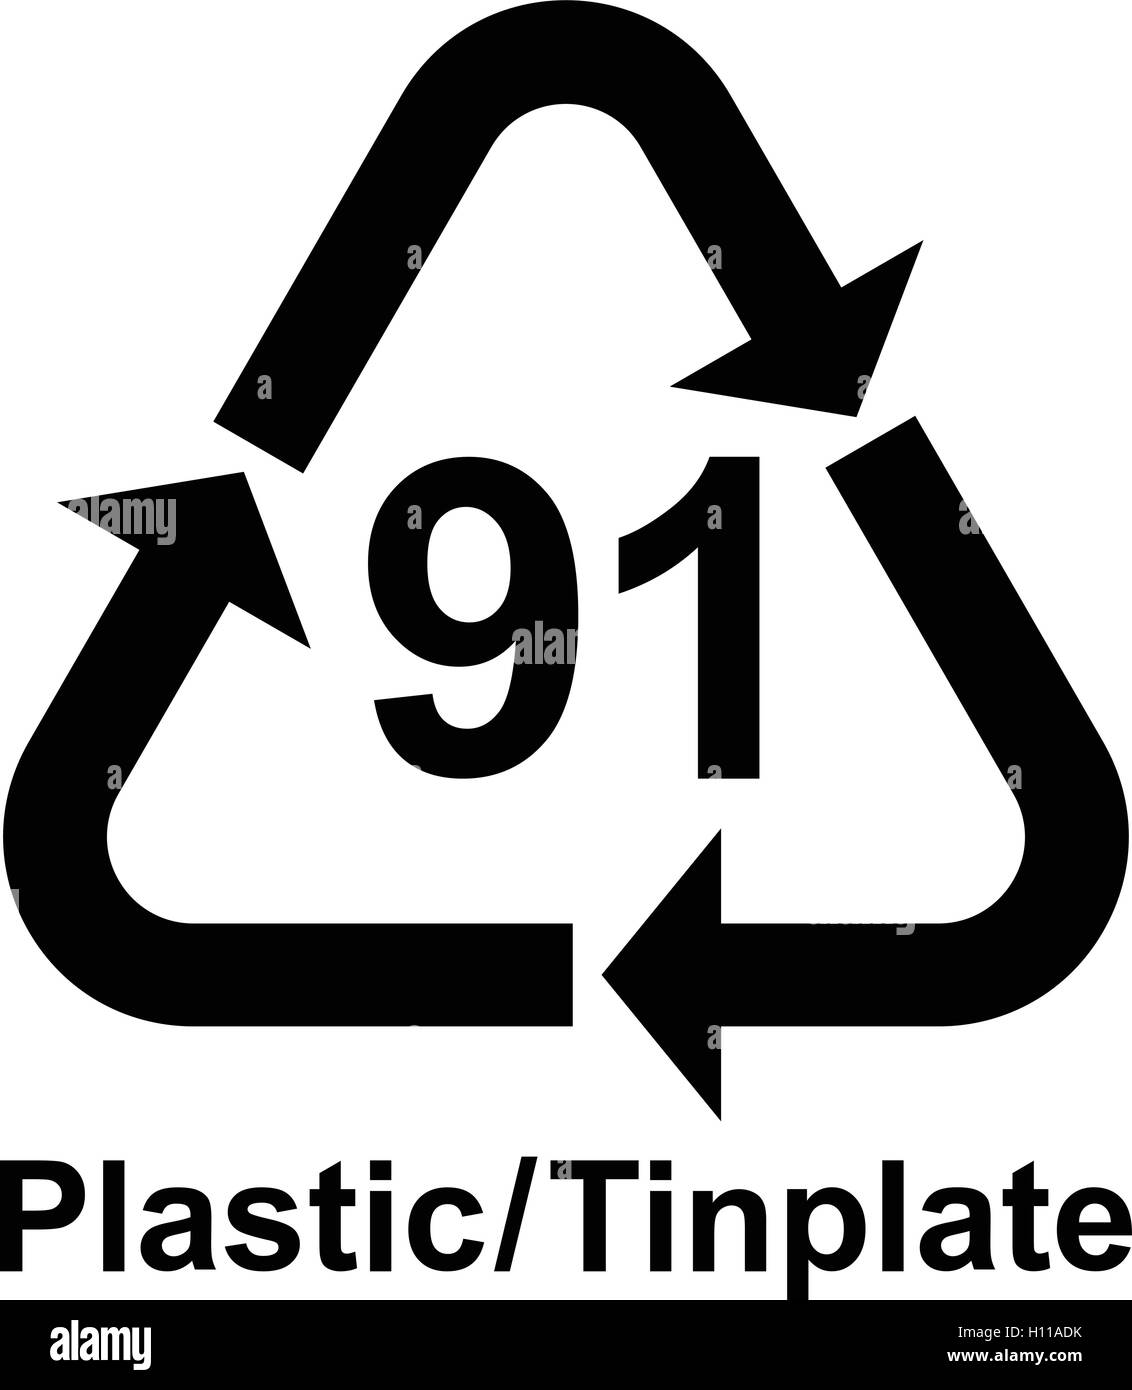 Composites recycling symbol 91. Composites recycling code 91, vector illustration. Stock Vector